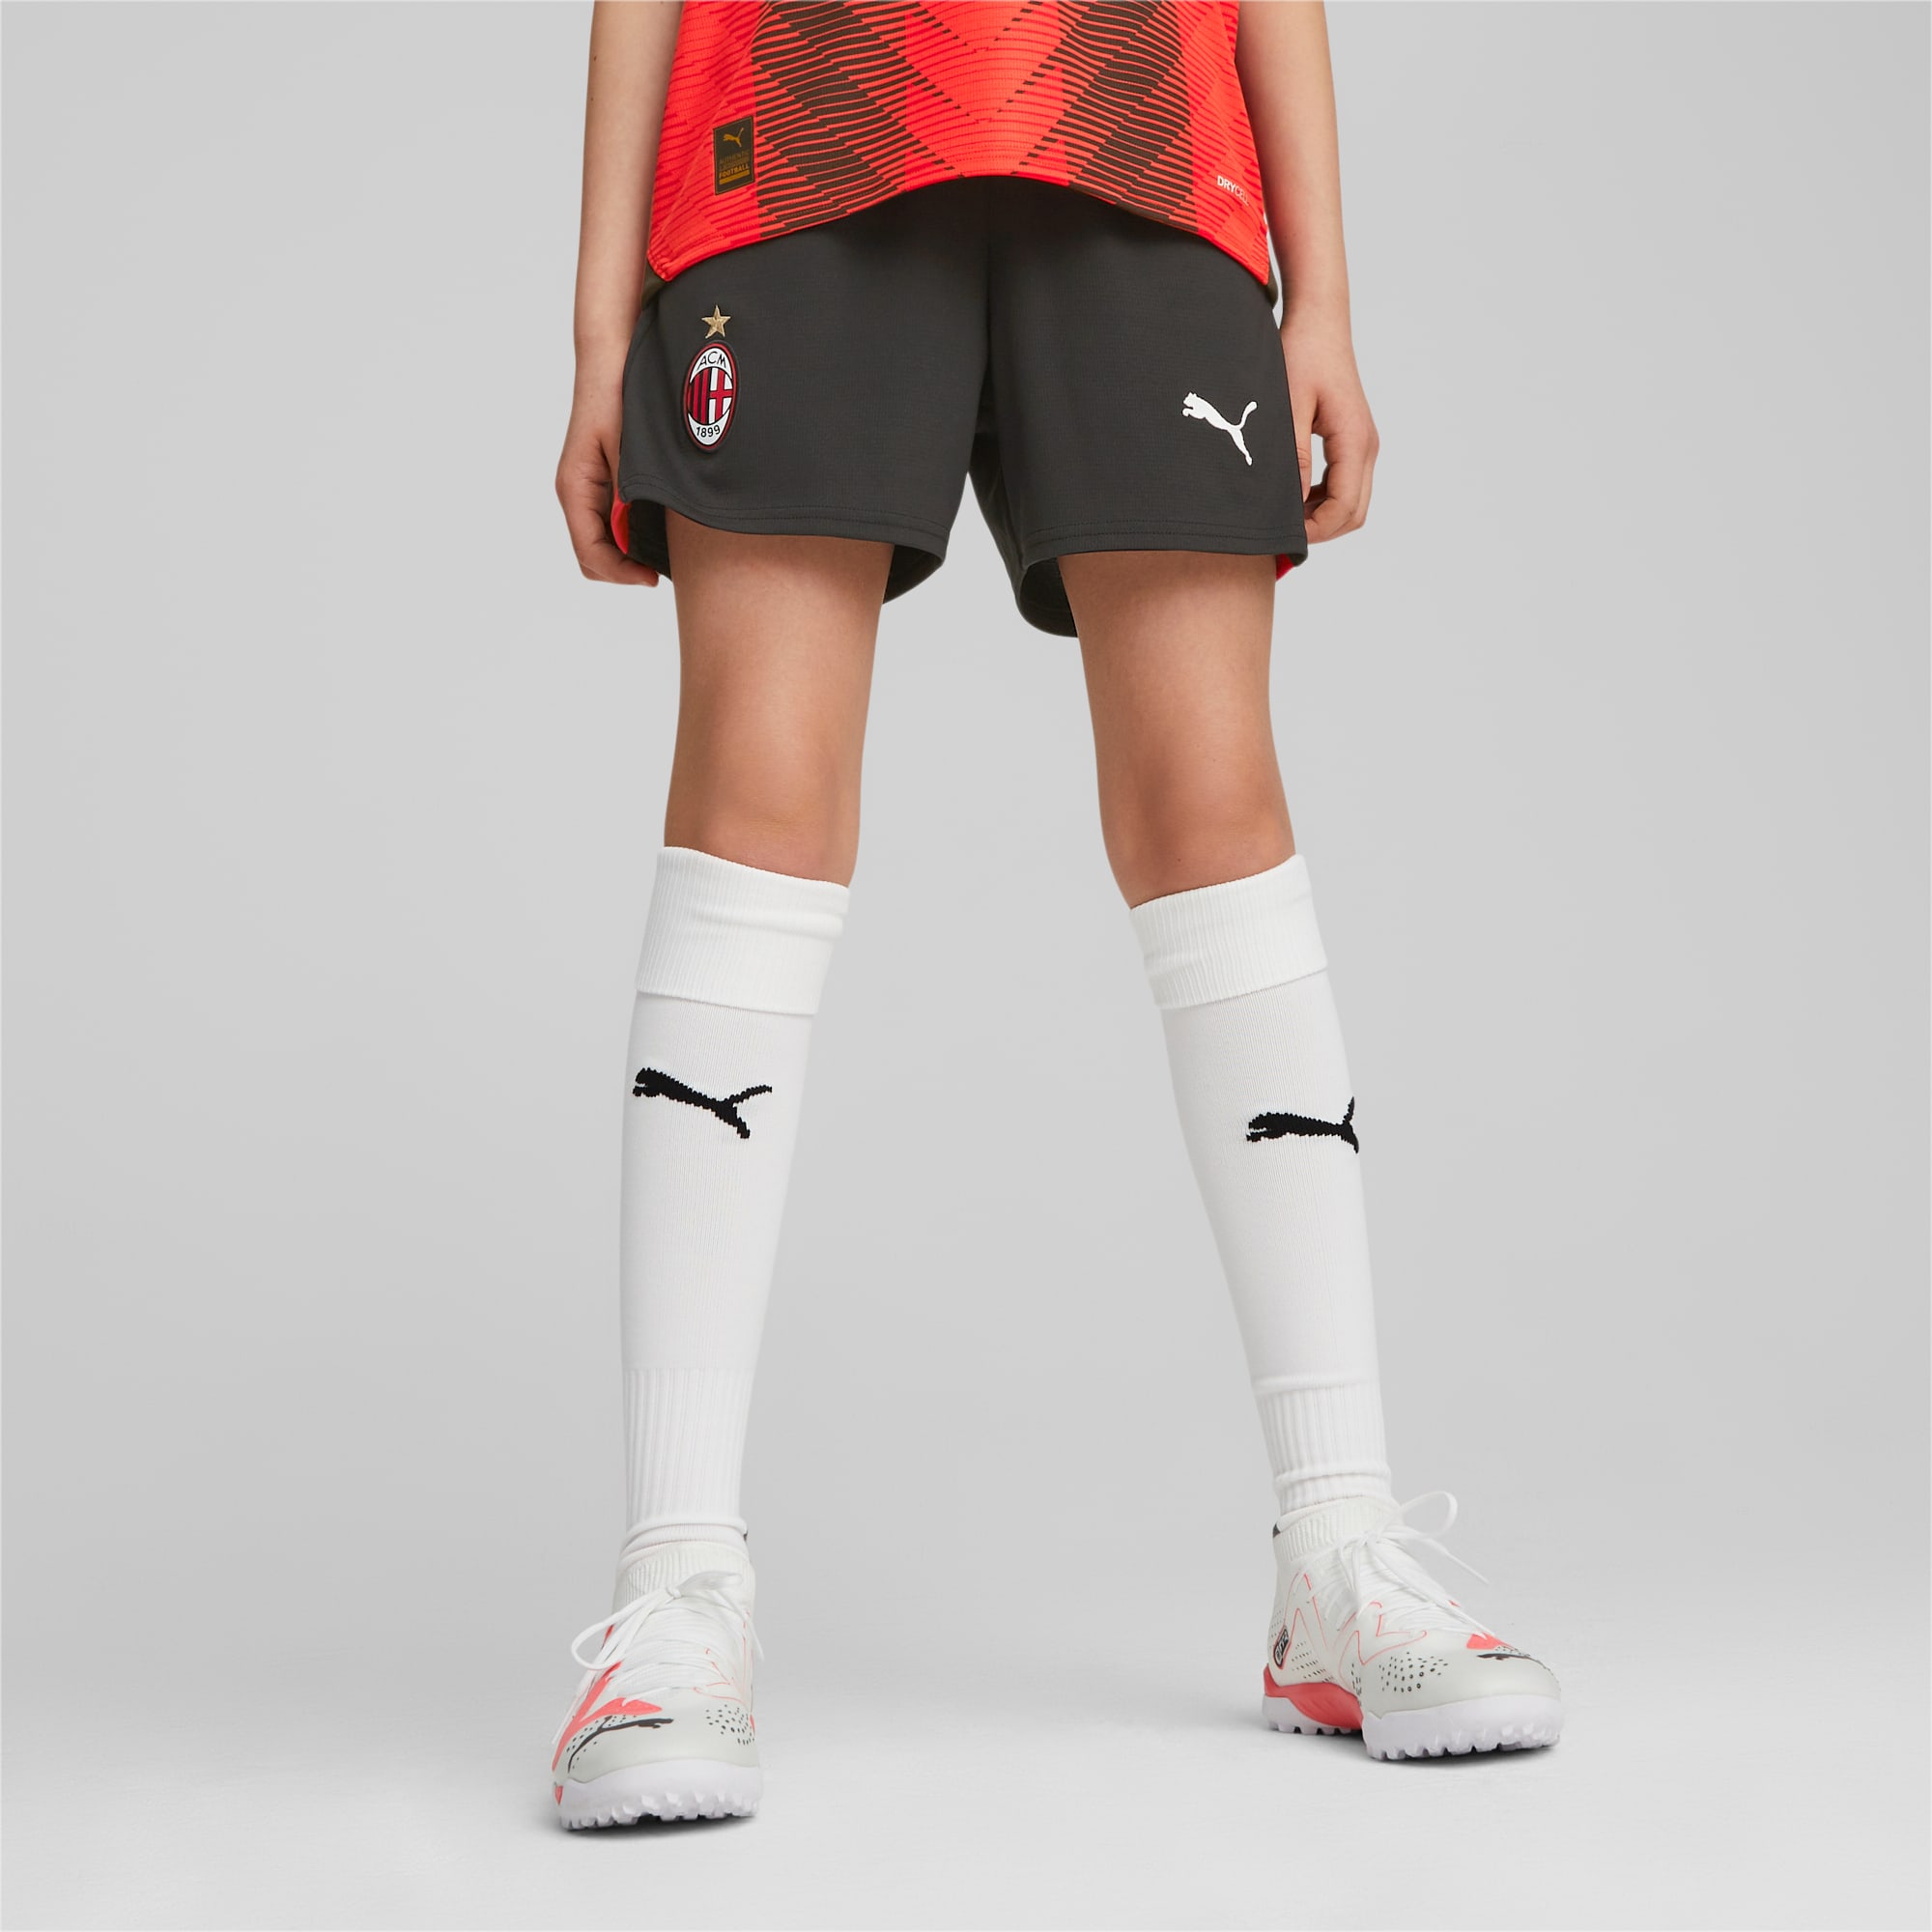 PUMA AC Milan Youth Football Shorts, Black/For All Time Red